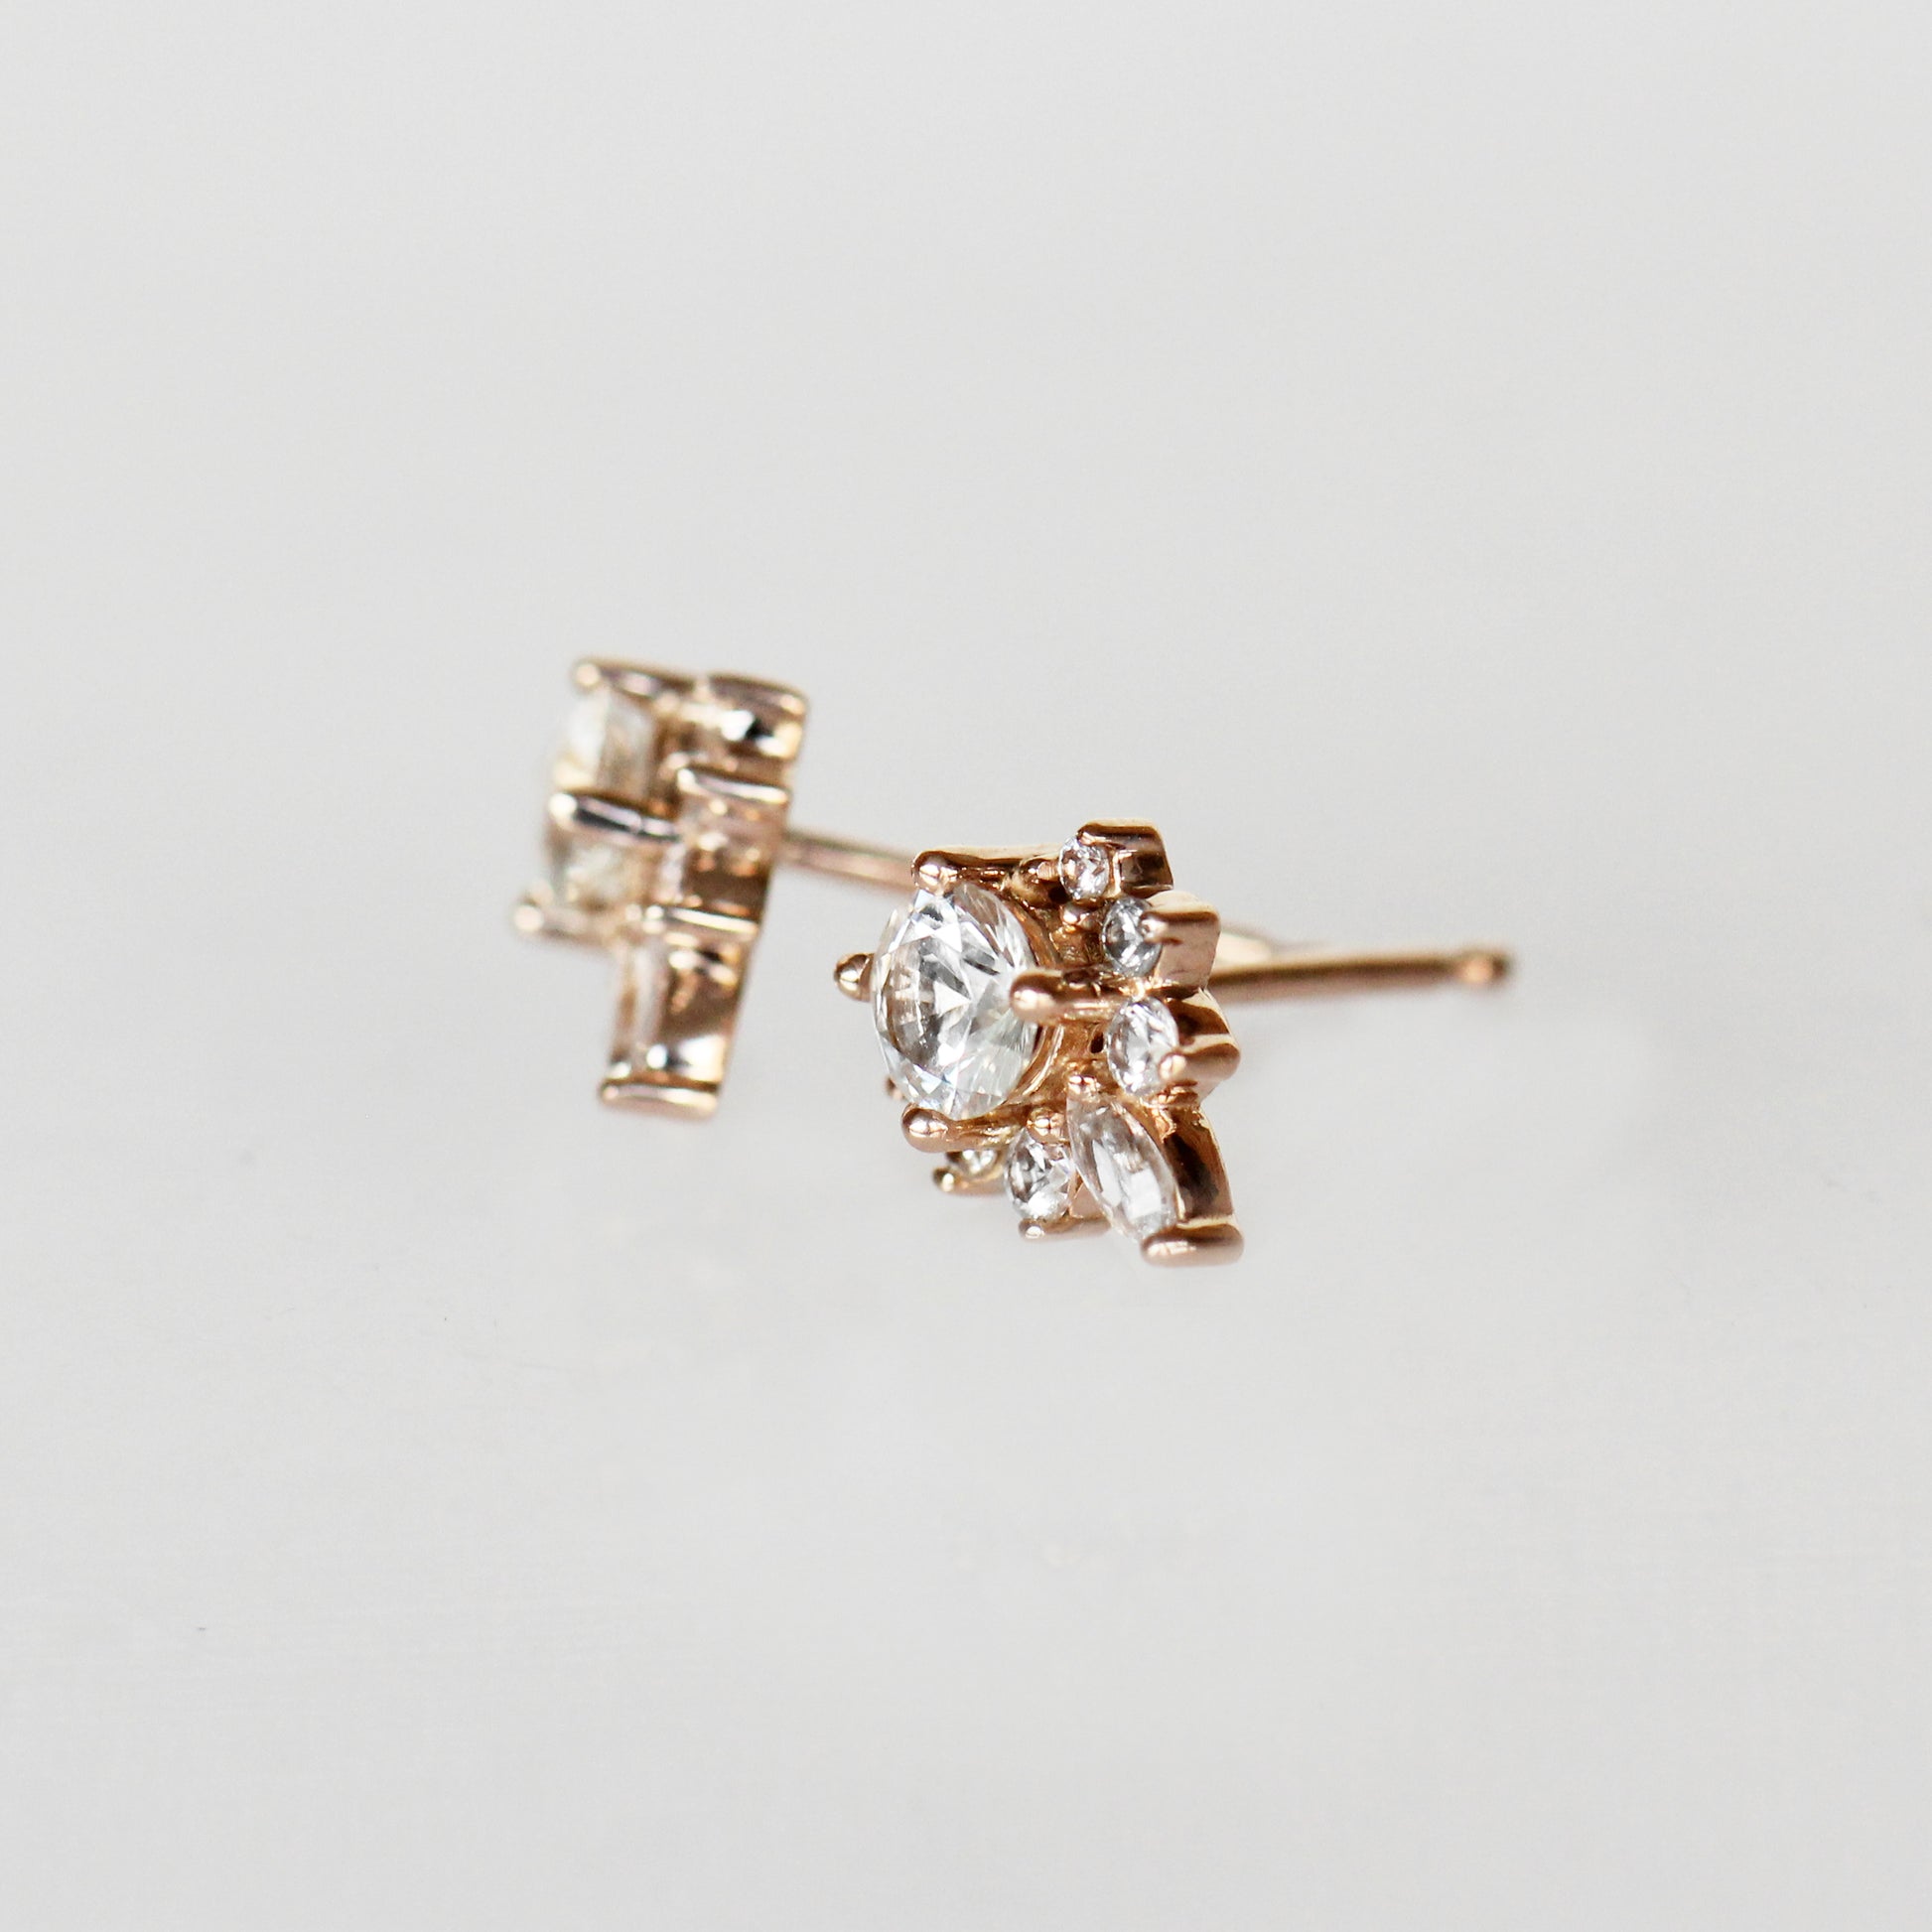 Zoe Earrings with White Sapphires - 14k of Your Choice - Made to Order - Midwinter Co. Alternative Bridal Rings and Modern Fine Jewelry